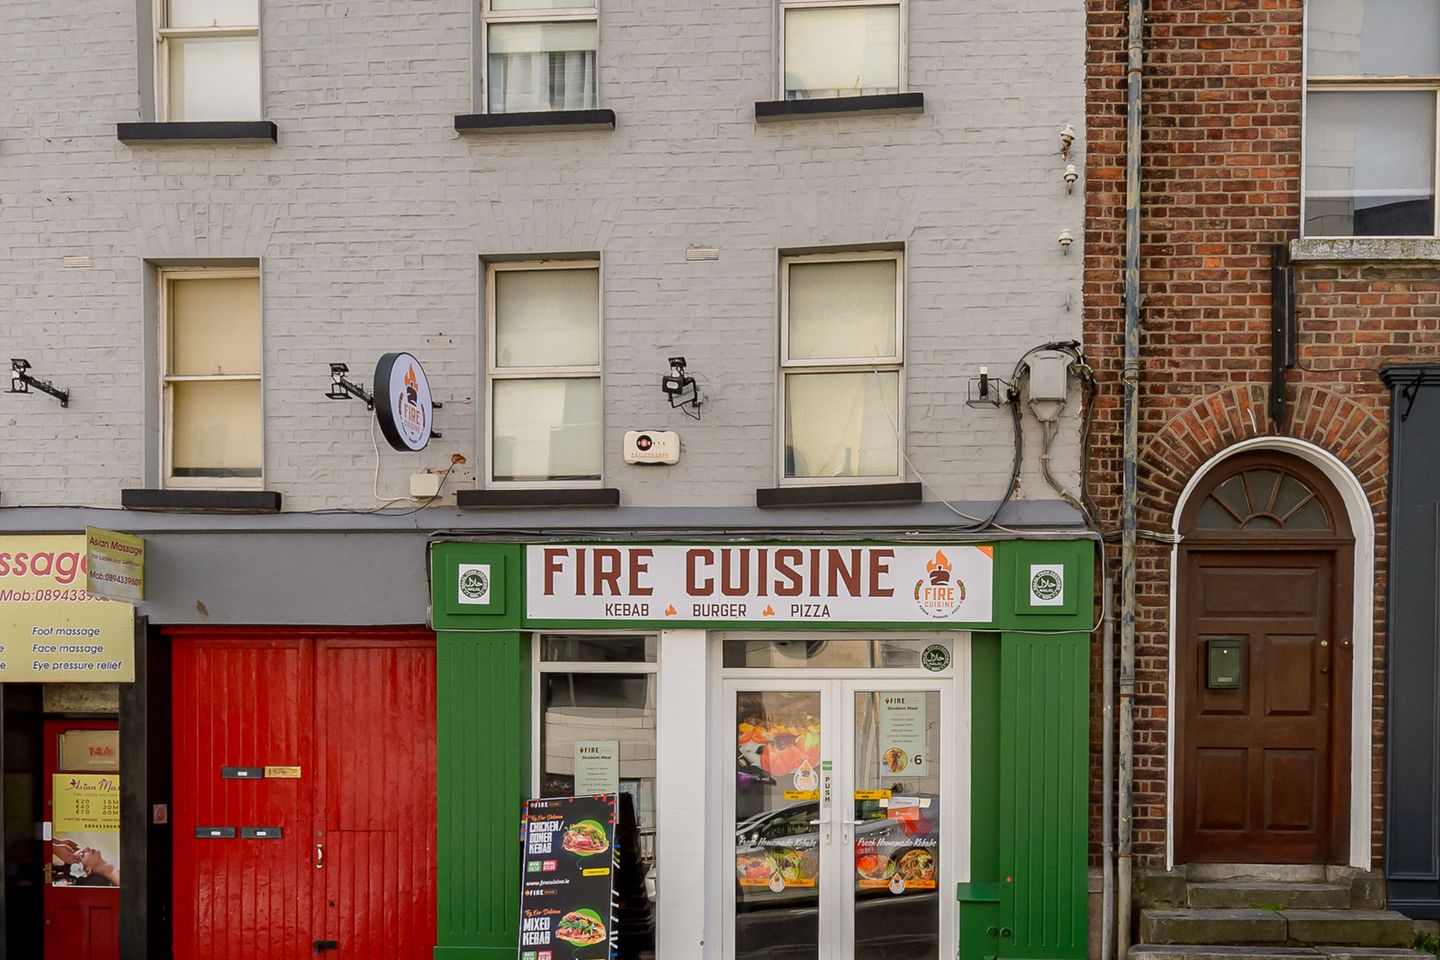 Fire Cuisine, 14 Peter Street, Drogheda, Co. Louth